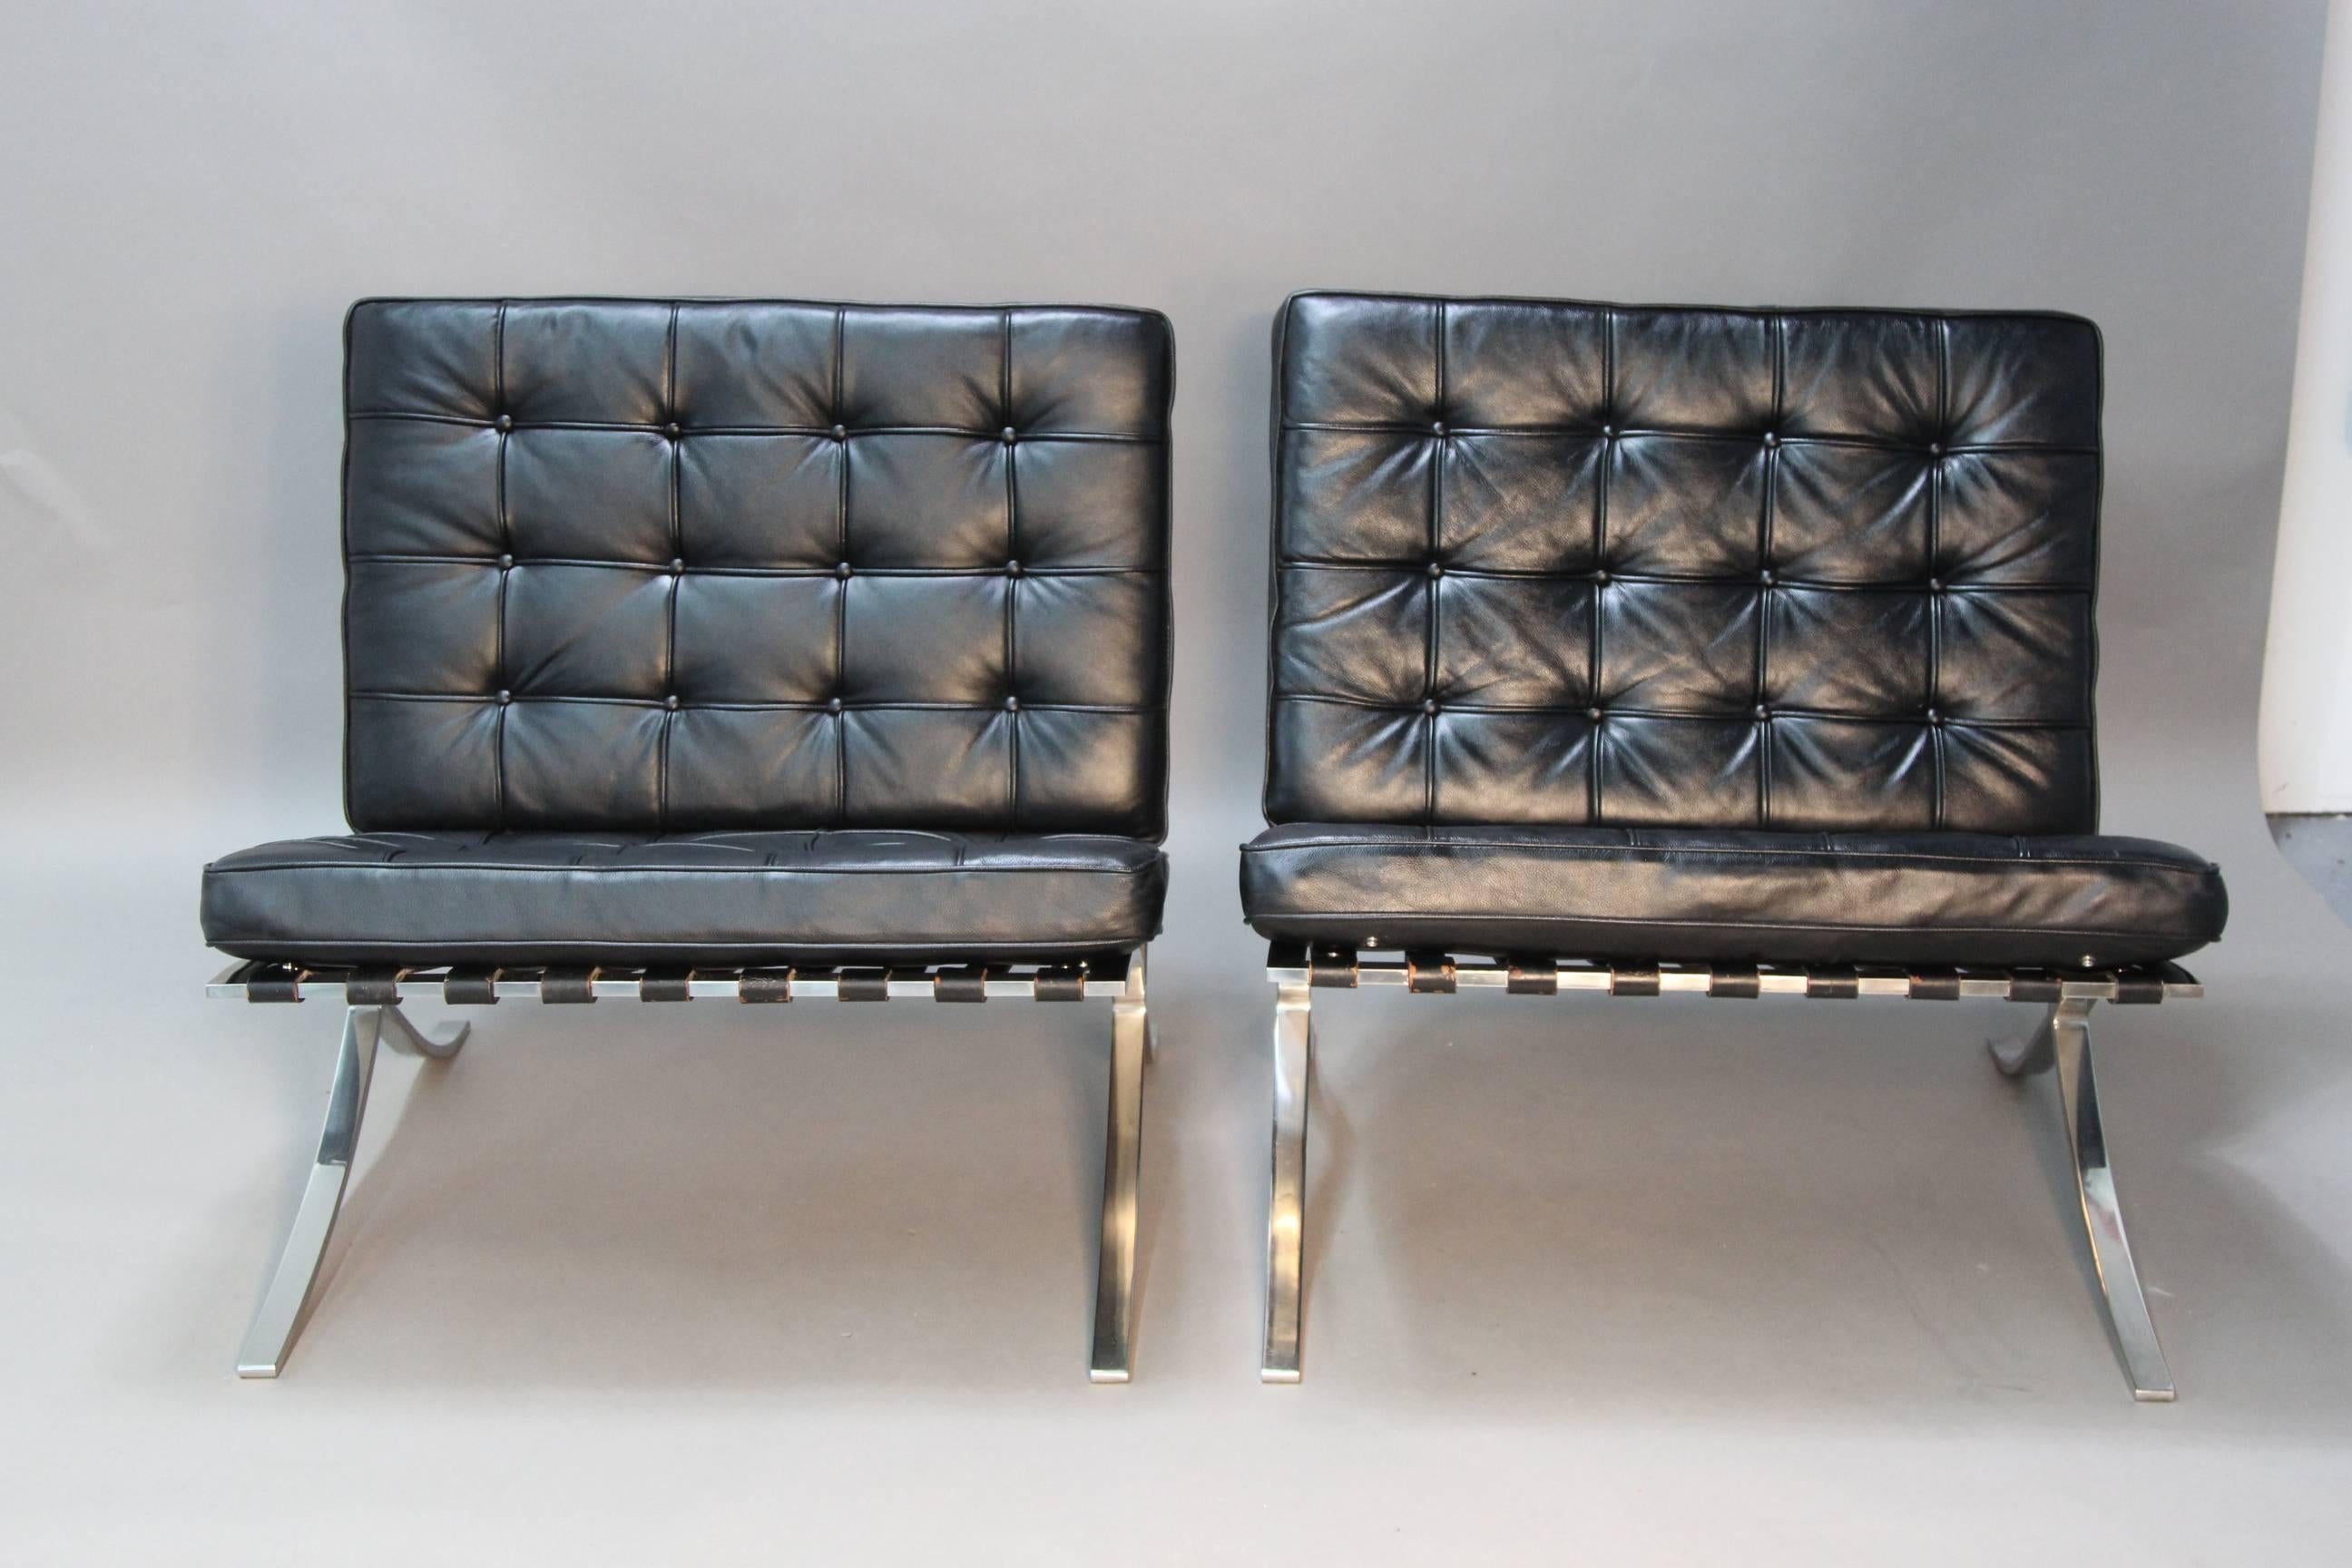 Classic Mies Van Der Rohe Barcelona chairs done in classic black leather. Original frame and straps with new cushions done in Spinneybeck Italian leather used by Knoll.